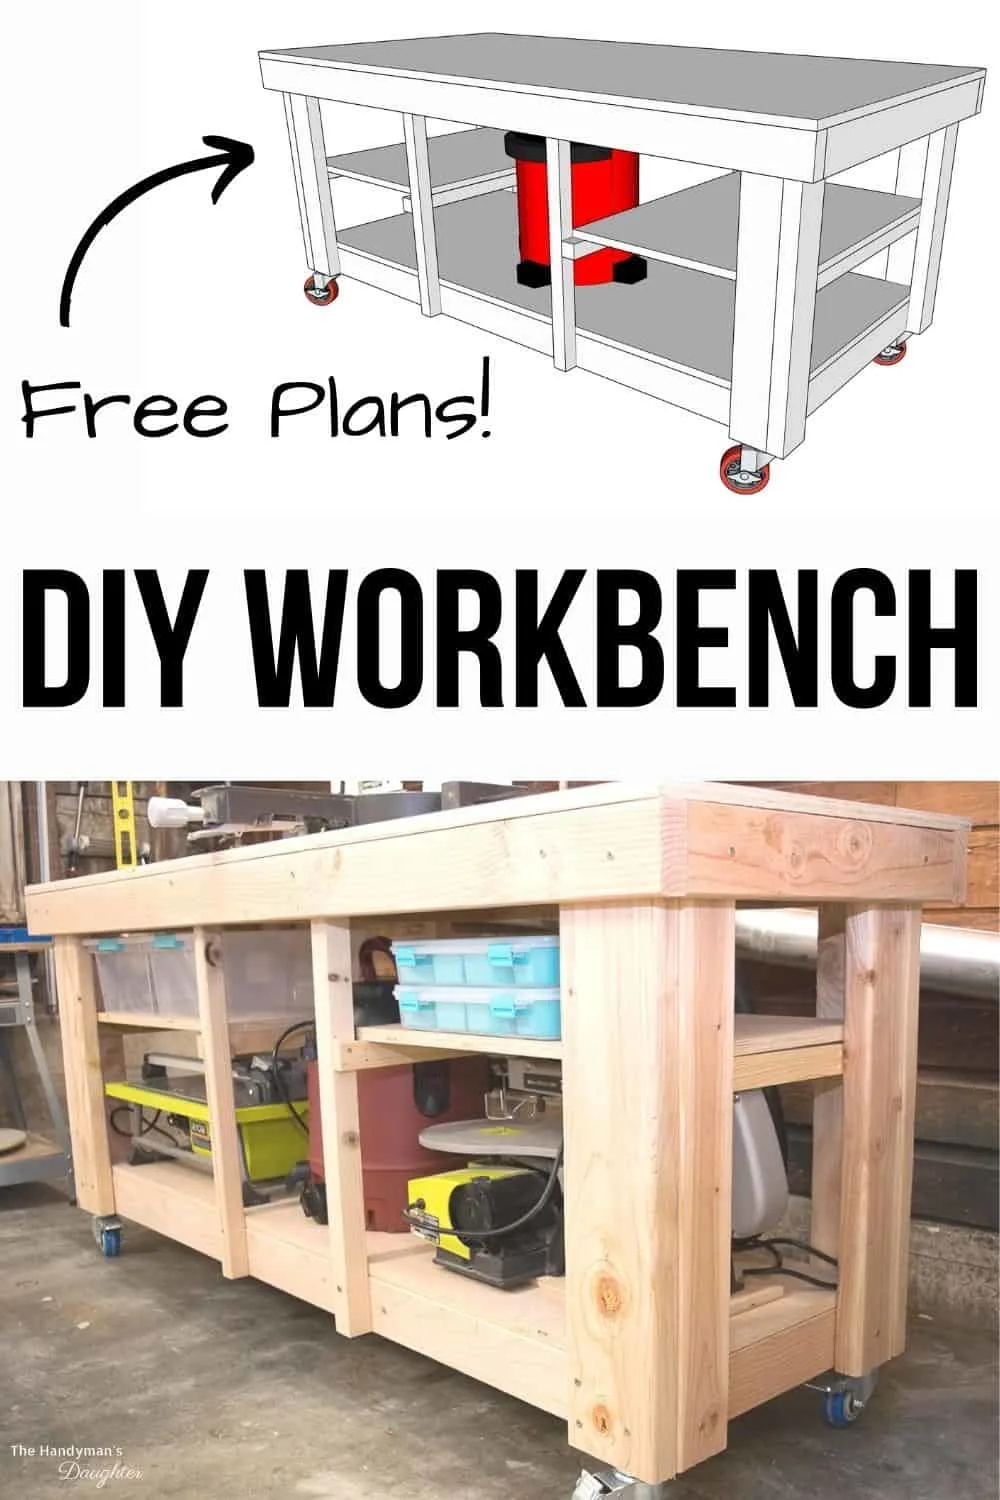 How to Make a Screw Organizer Cabinet - Simple Woodworking Project